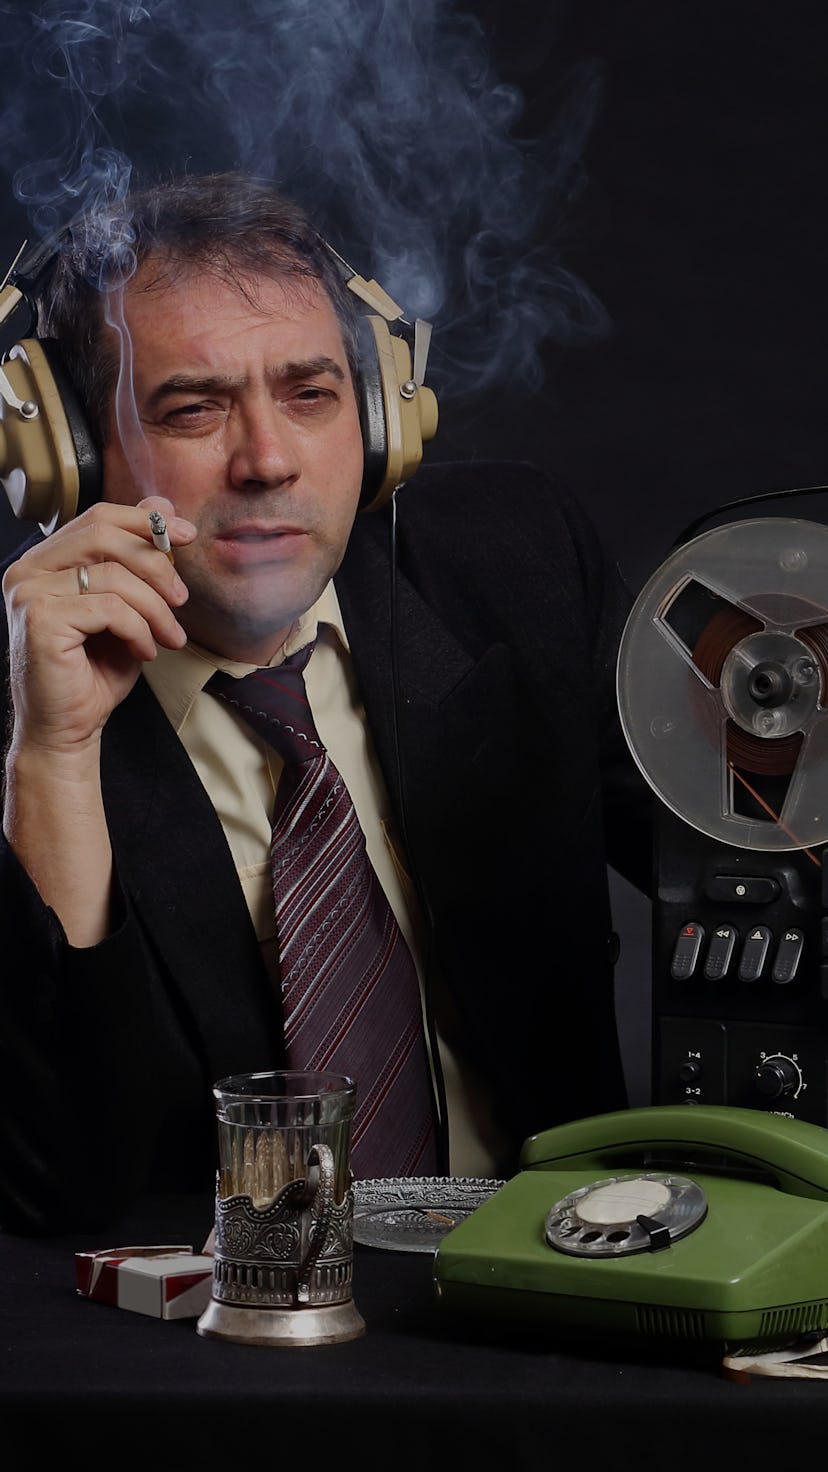 Man in headphones listen to music on record player